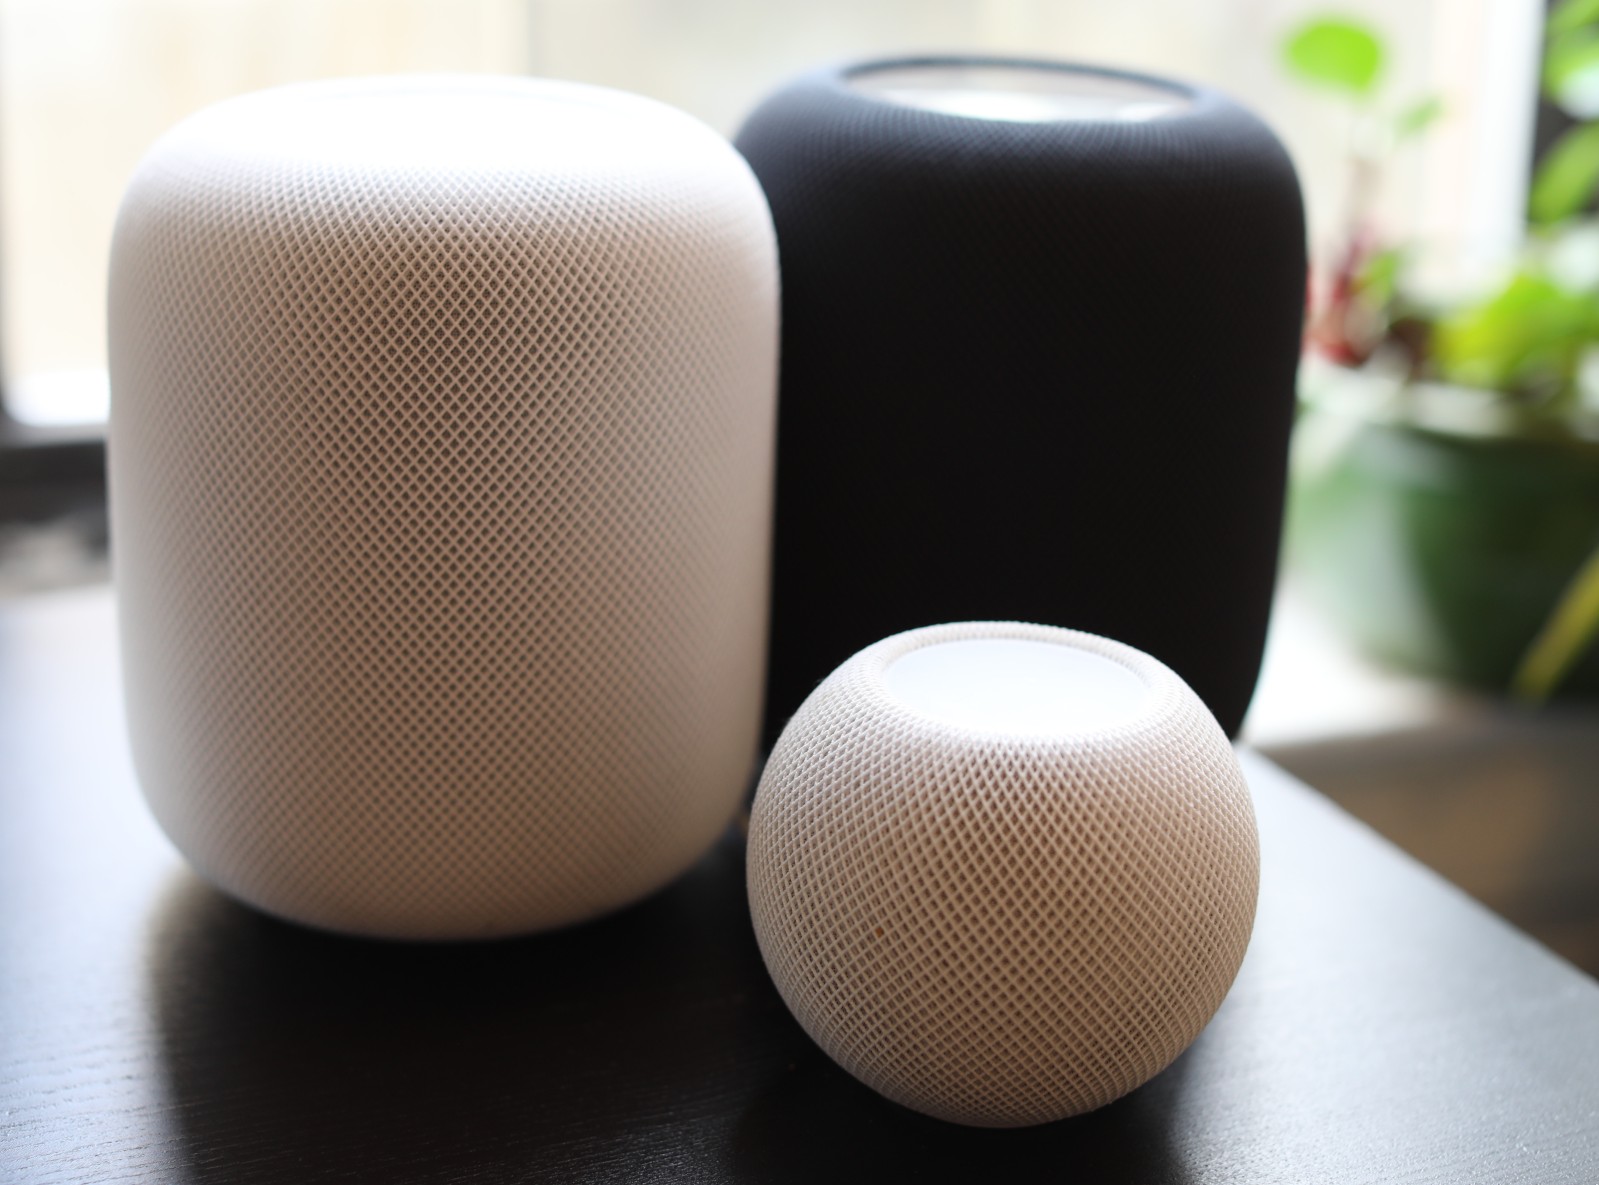 Line up of both Apple HomePod 1 and 2, as well as the Apple Mini smart speakers